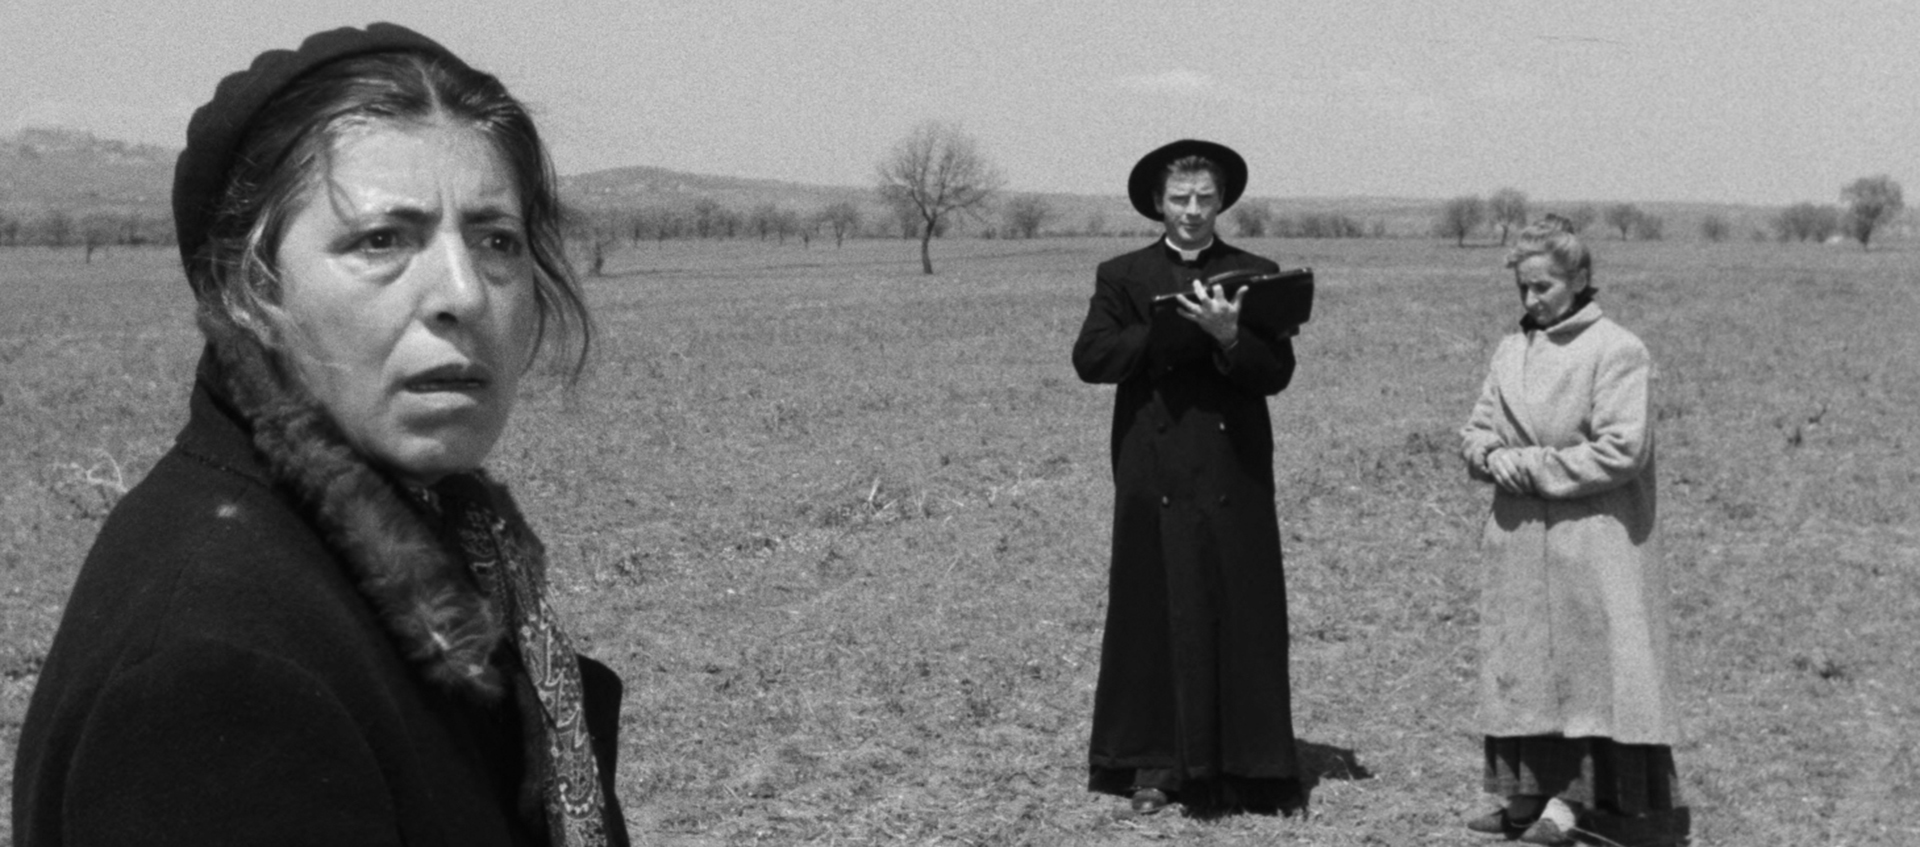 Black-and-white still featuring Maria (Stella Florina), Carlo (Richard Basehart), and actress Luccetta Muratori (from left to right). They are standing in a field; Maria is in the forefront with a worried look on her face. Farther in the distance is Carlo, who is dressed in a black priest robe and hat, and there is an older woman to his right; she is holding her hands together at her stomach and is looking down.